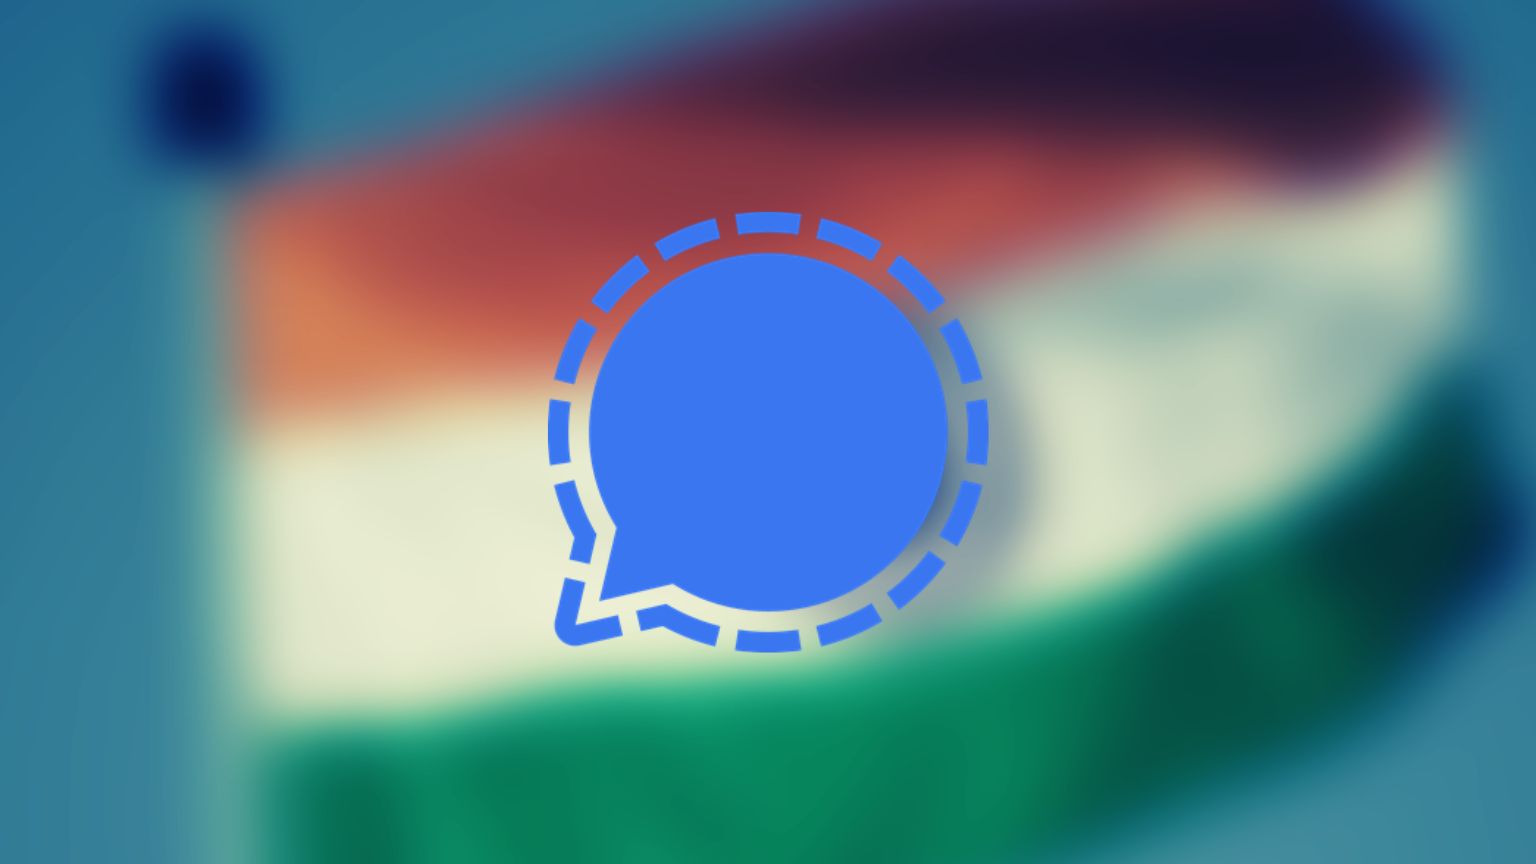 Signal says it will leave India if the government bans encrypted messaging